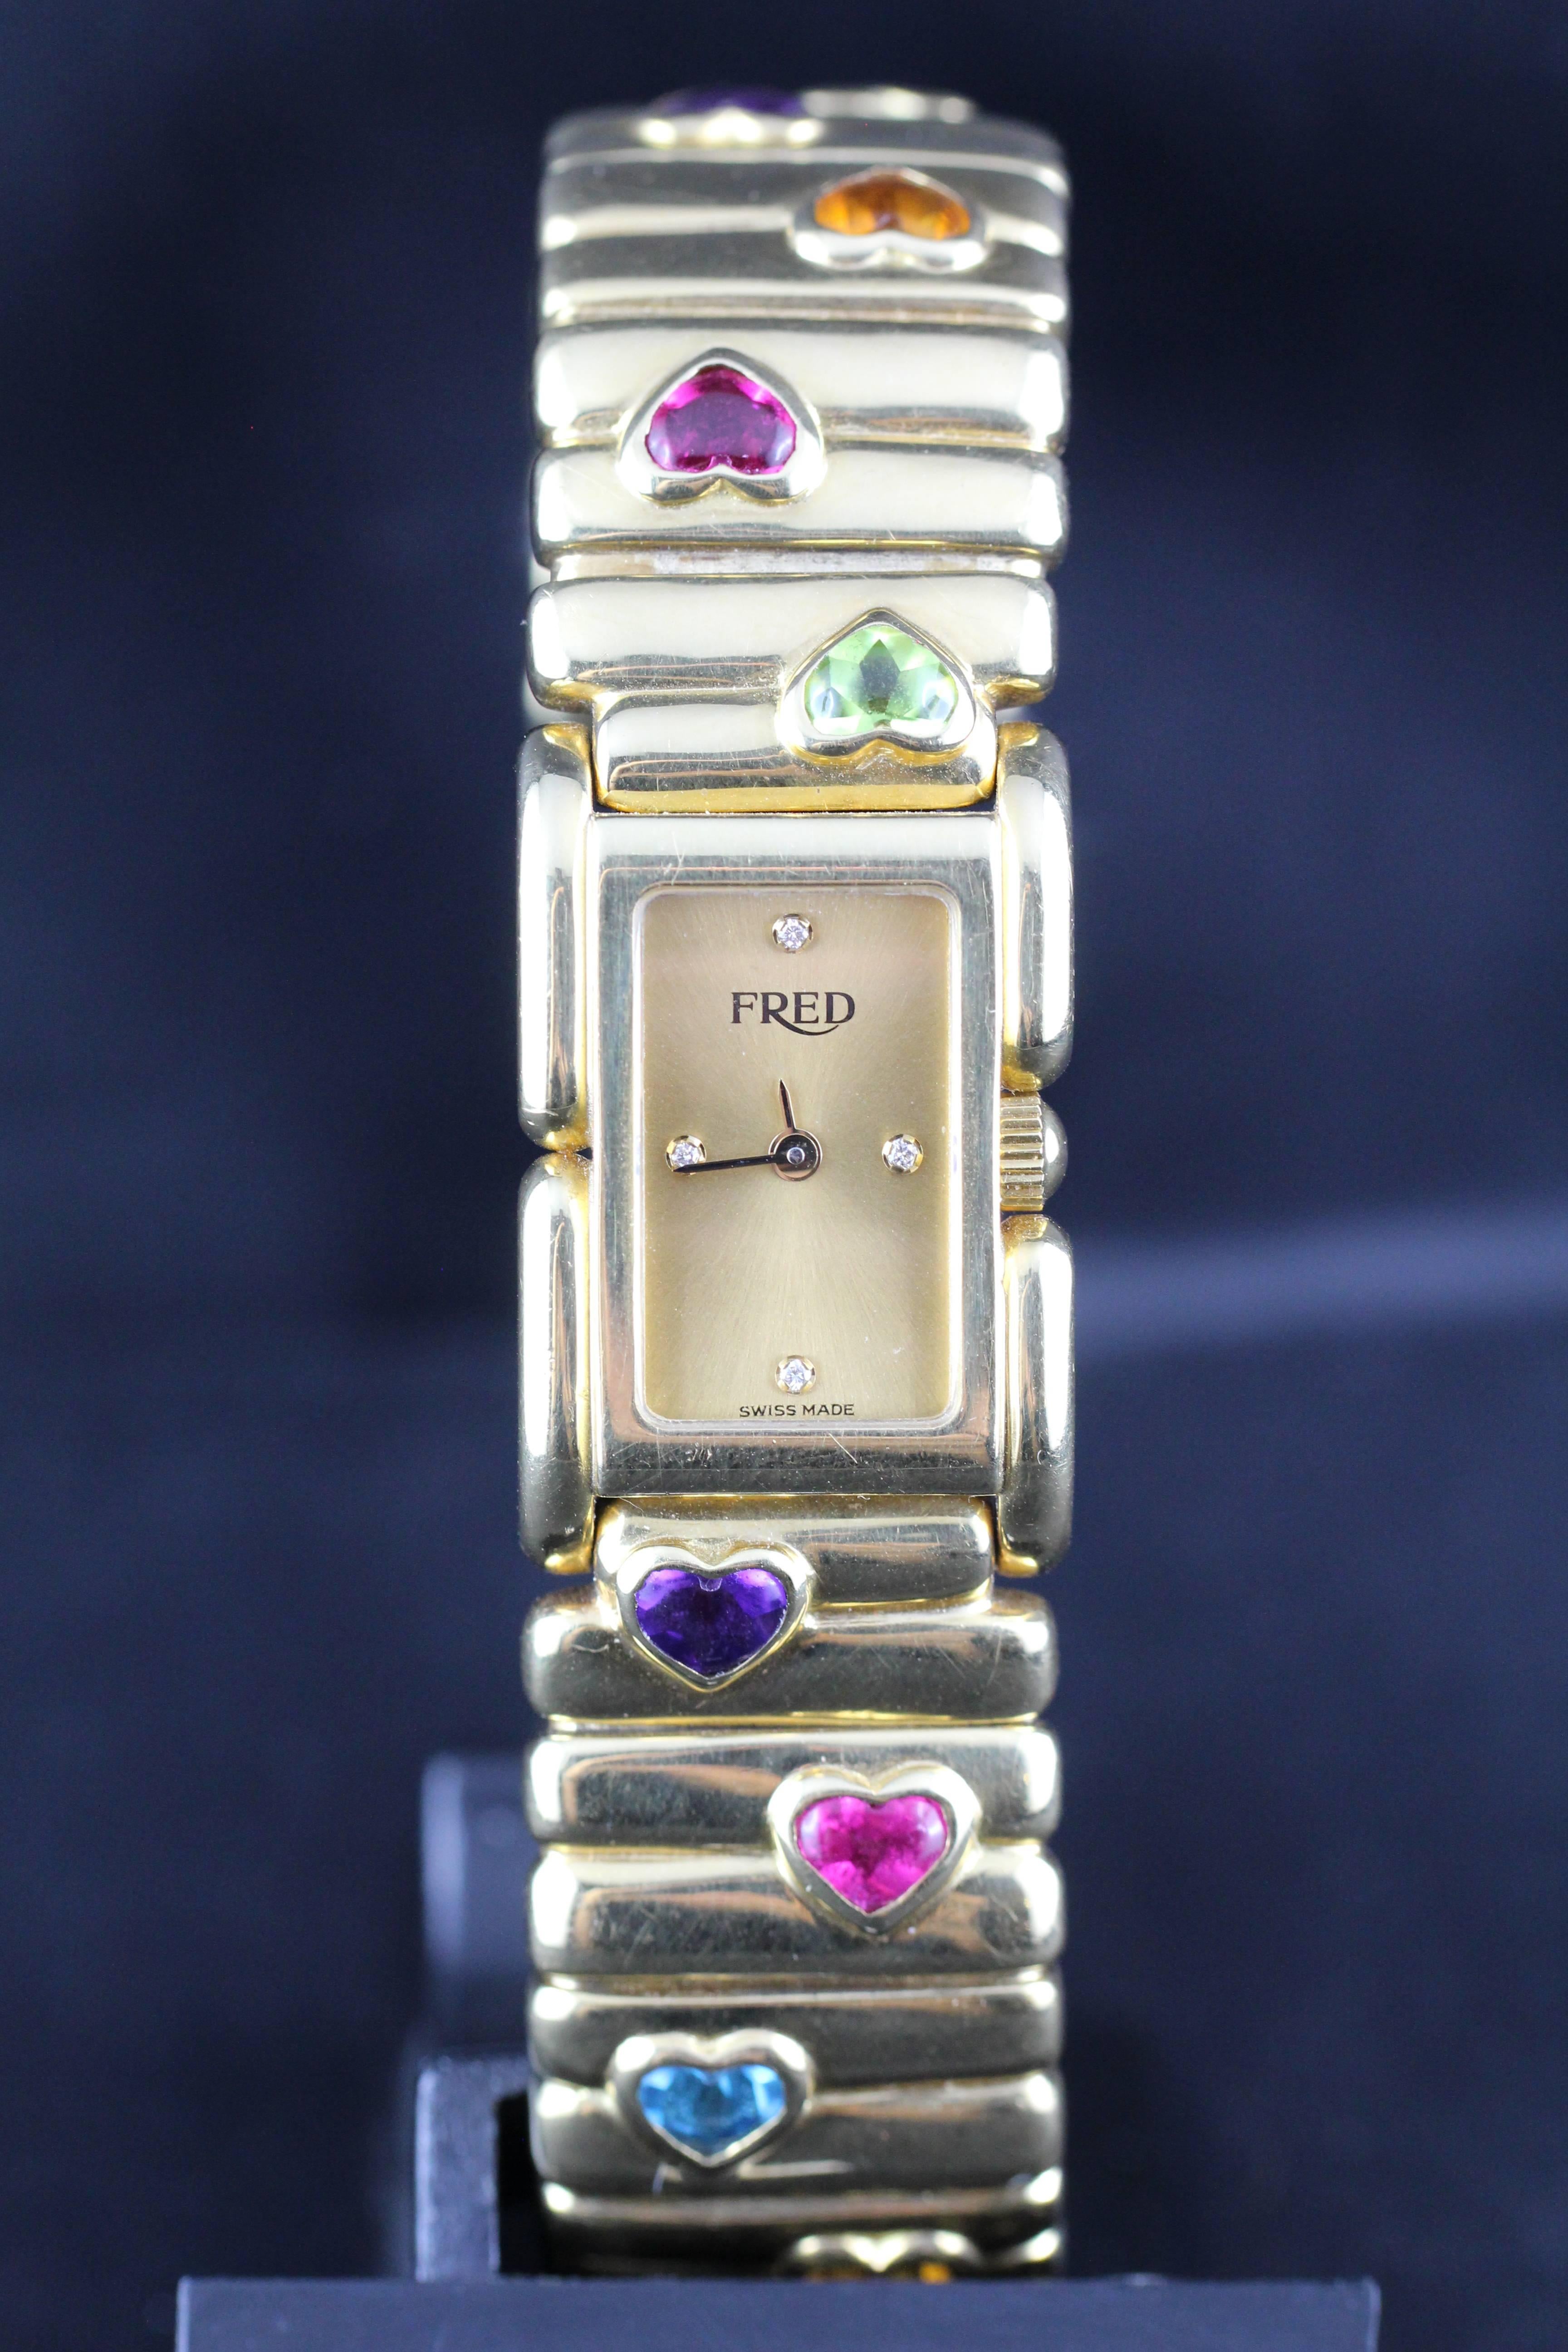 A Fred 18KT yellow gold wrist watch for lady.

Integral 18KT yellow gold fred bracelet set with Amethysts, pink tourmalines, peridots, blue topaz, and citrines.

The gold metal dial features diamonds index.
Sapphire glass.

Quartz battery